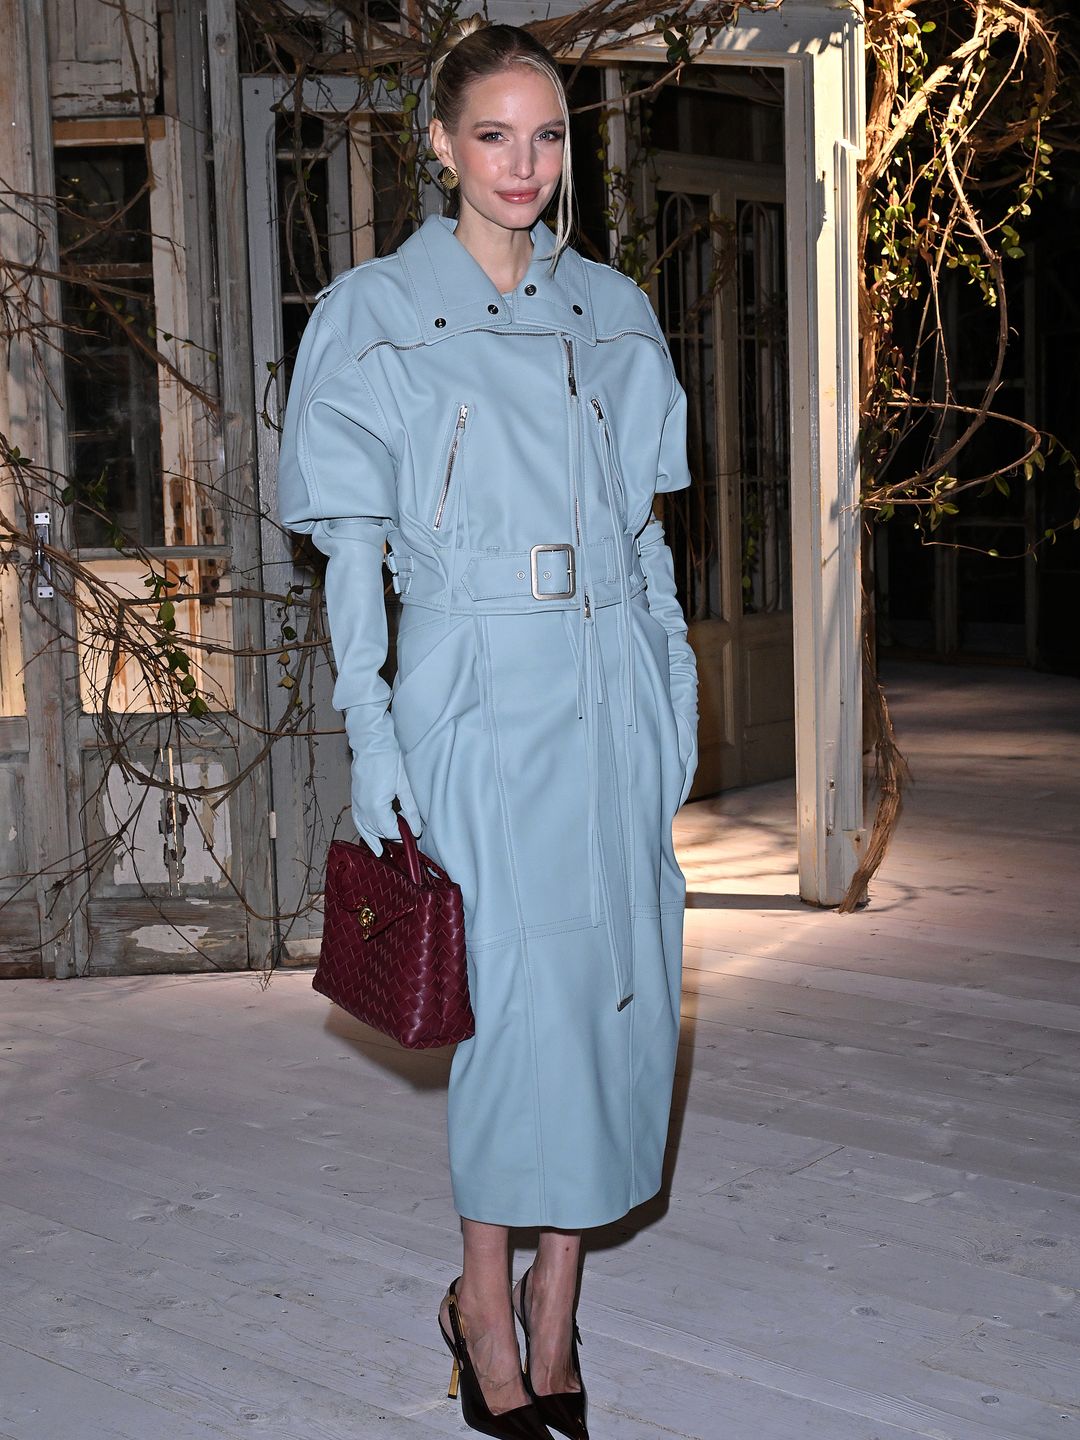 Leonie Hanne wore a baby blue leather coat and red handbag to the Antonio Marras show. 